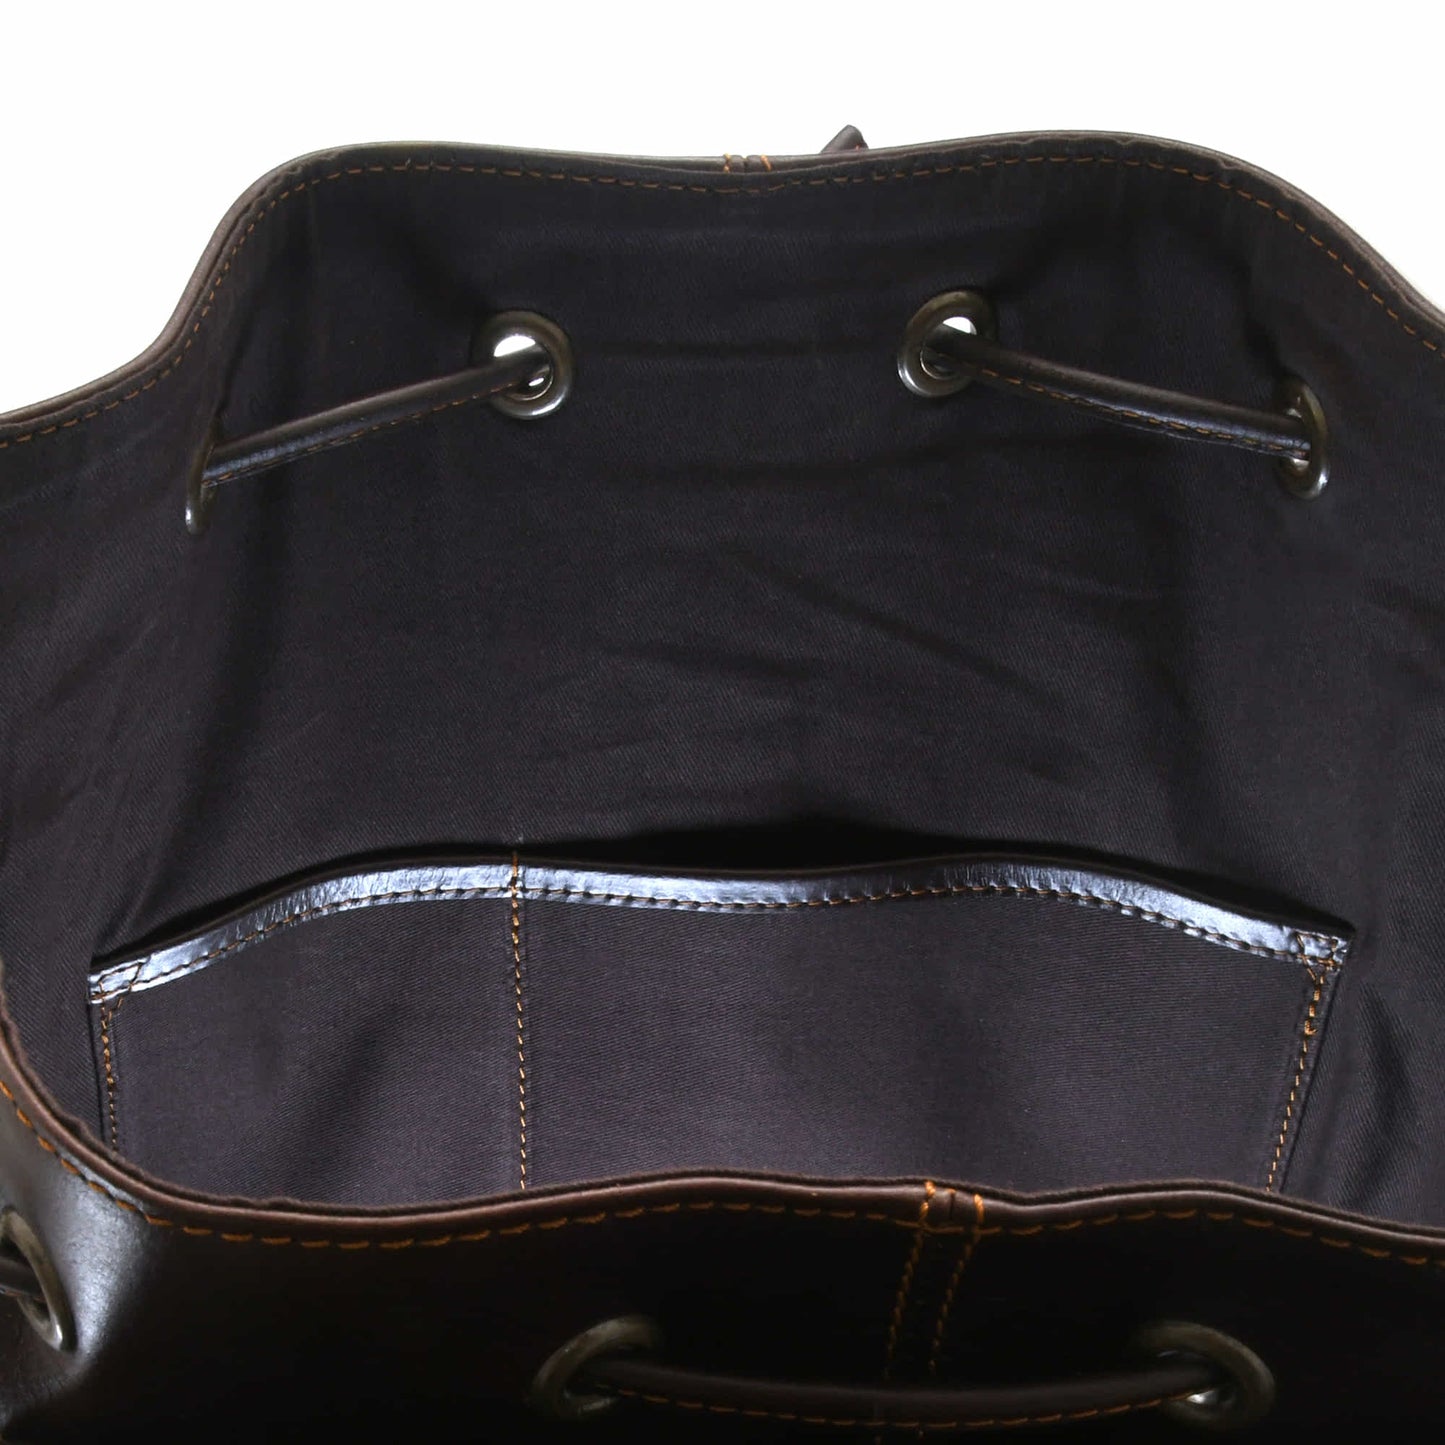 Style n Craft 392150 Backpack Large in Full Grain Dark Brown Leather - Inside View Showing the 2 Open Pockets